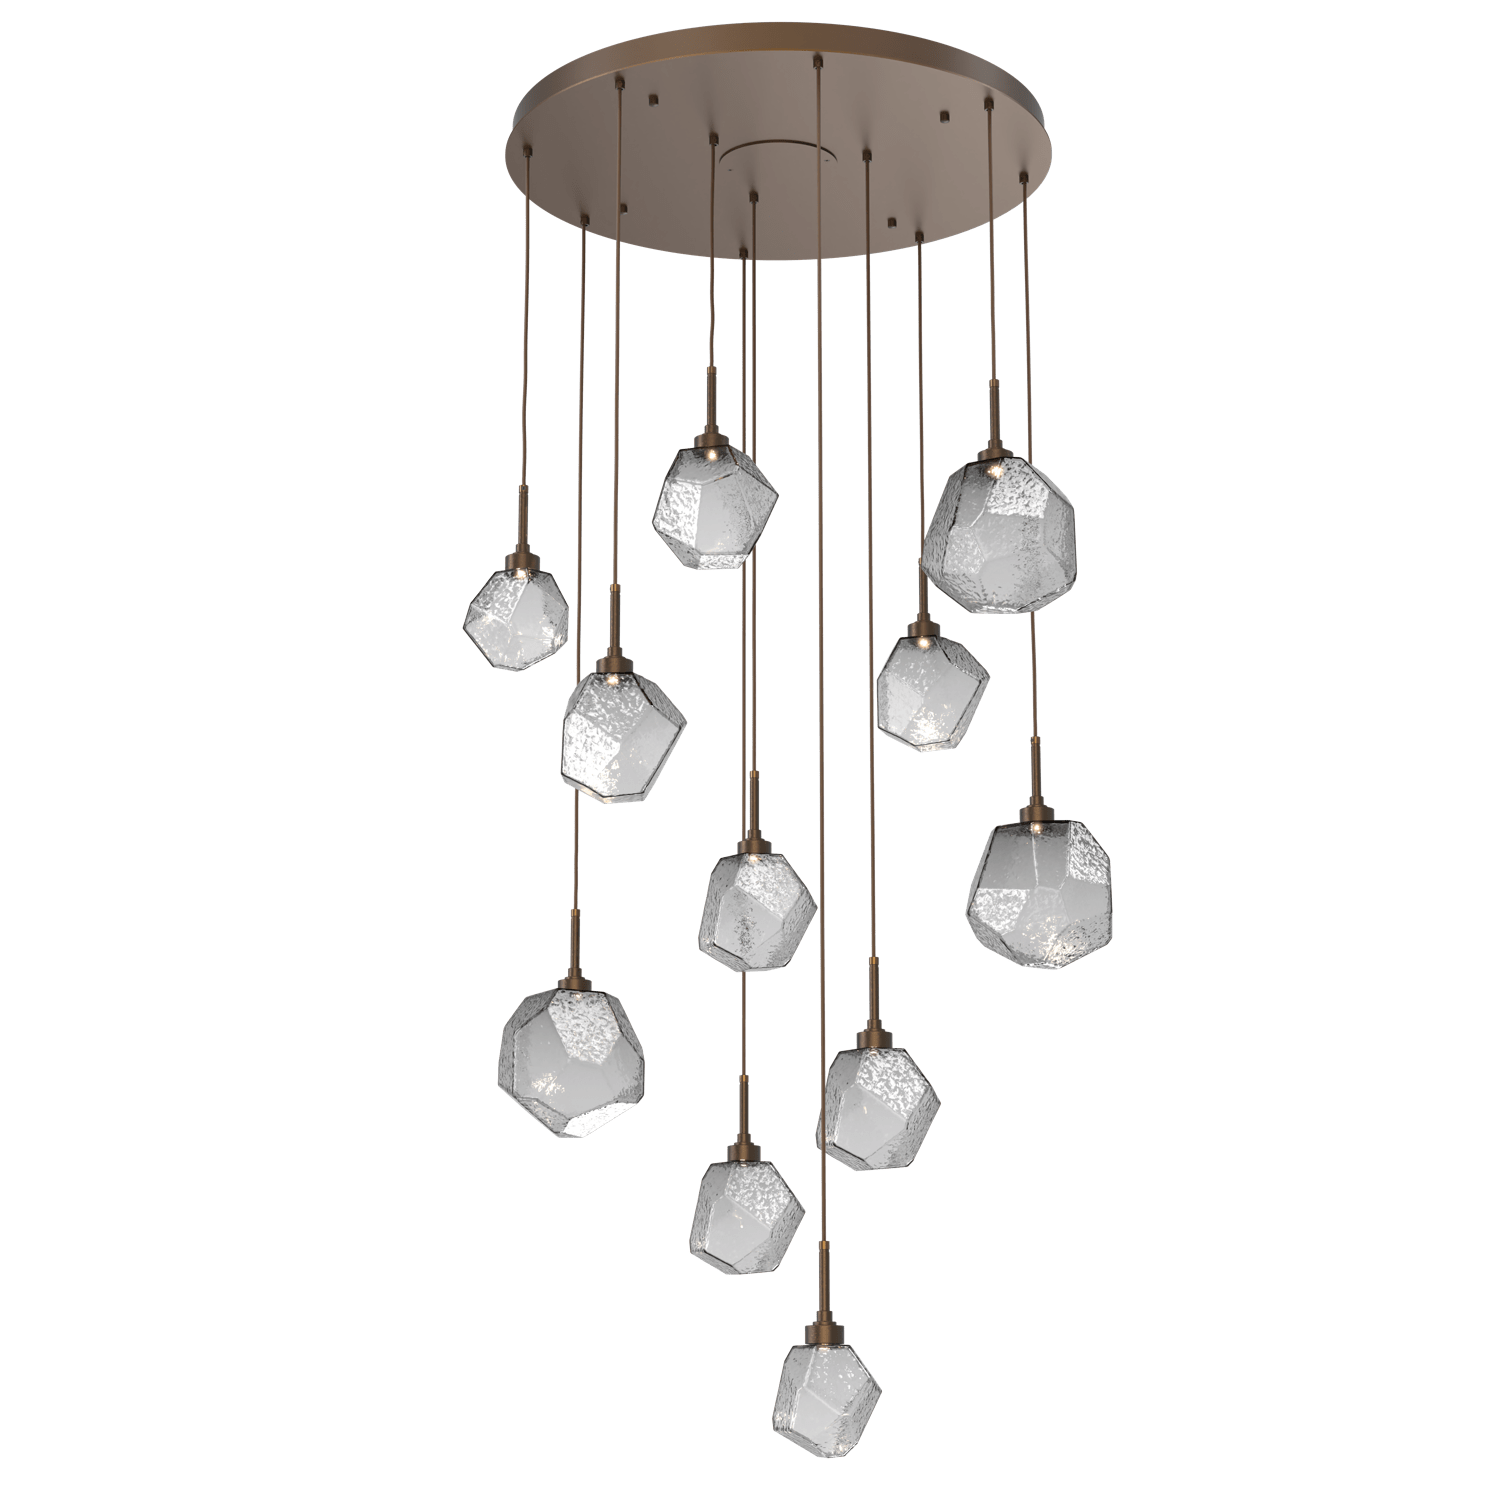 CHB0039-11-FB-S-Hammerton-Studio-Gem-11-light-round-pendant-chandelier-with-flat-bronze-finish-and-smoke-blown-glass-shades-and-LED-lamping